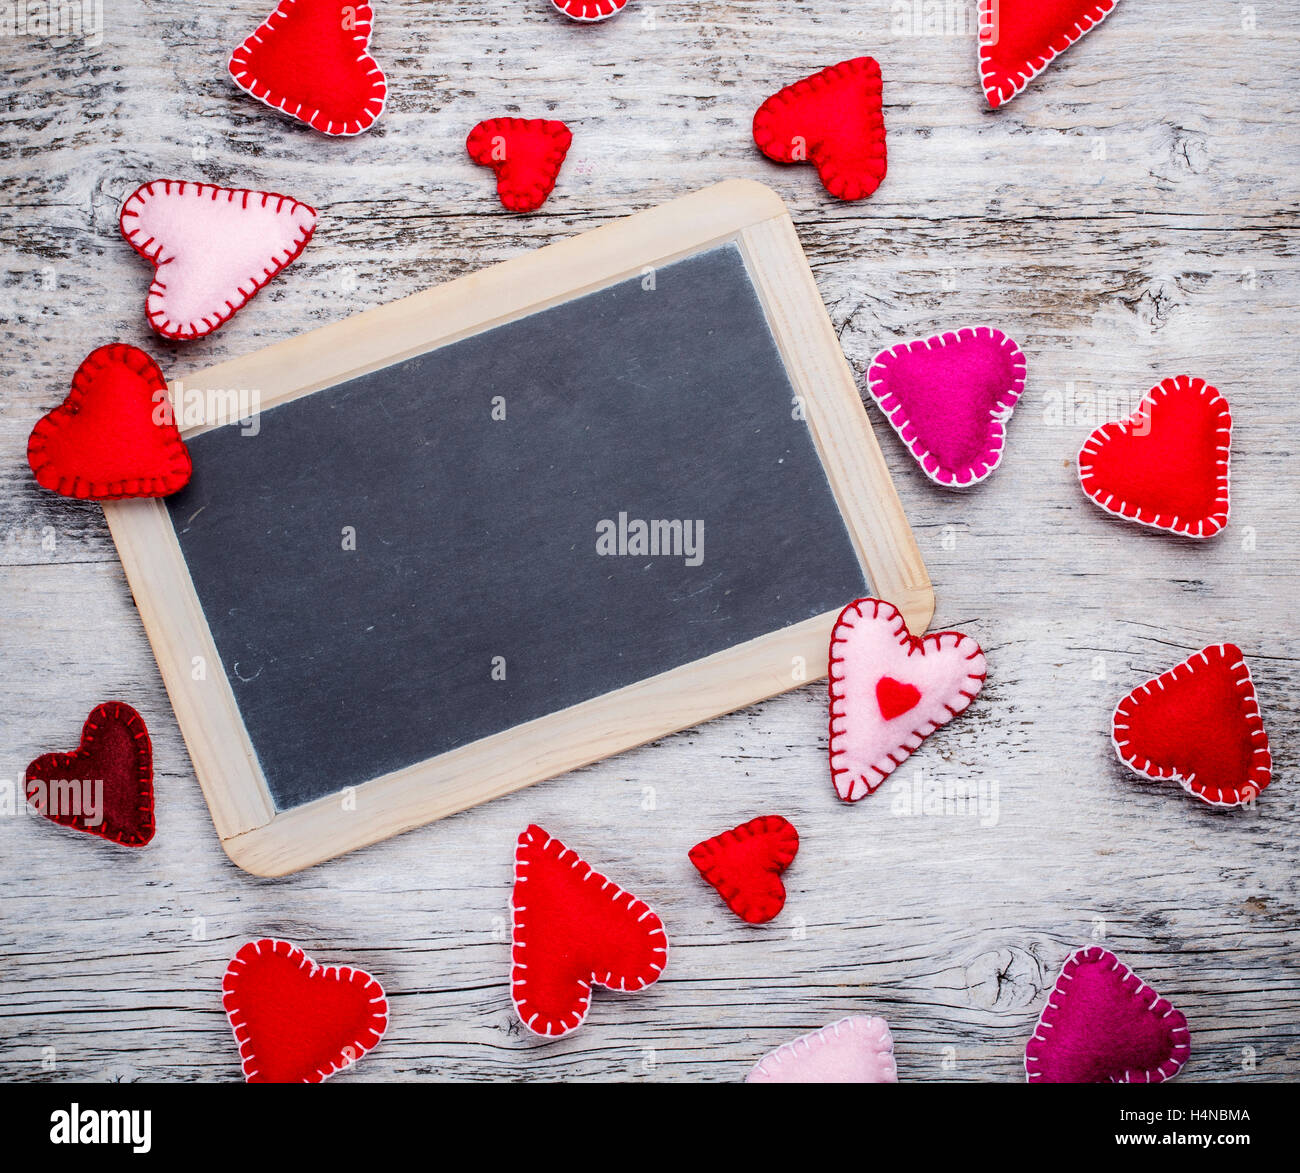 Chalkboard with felt hearts used as a symbol of love Stock Photo